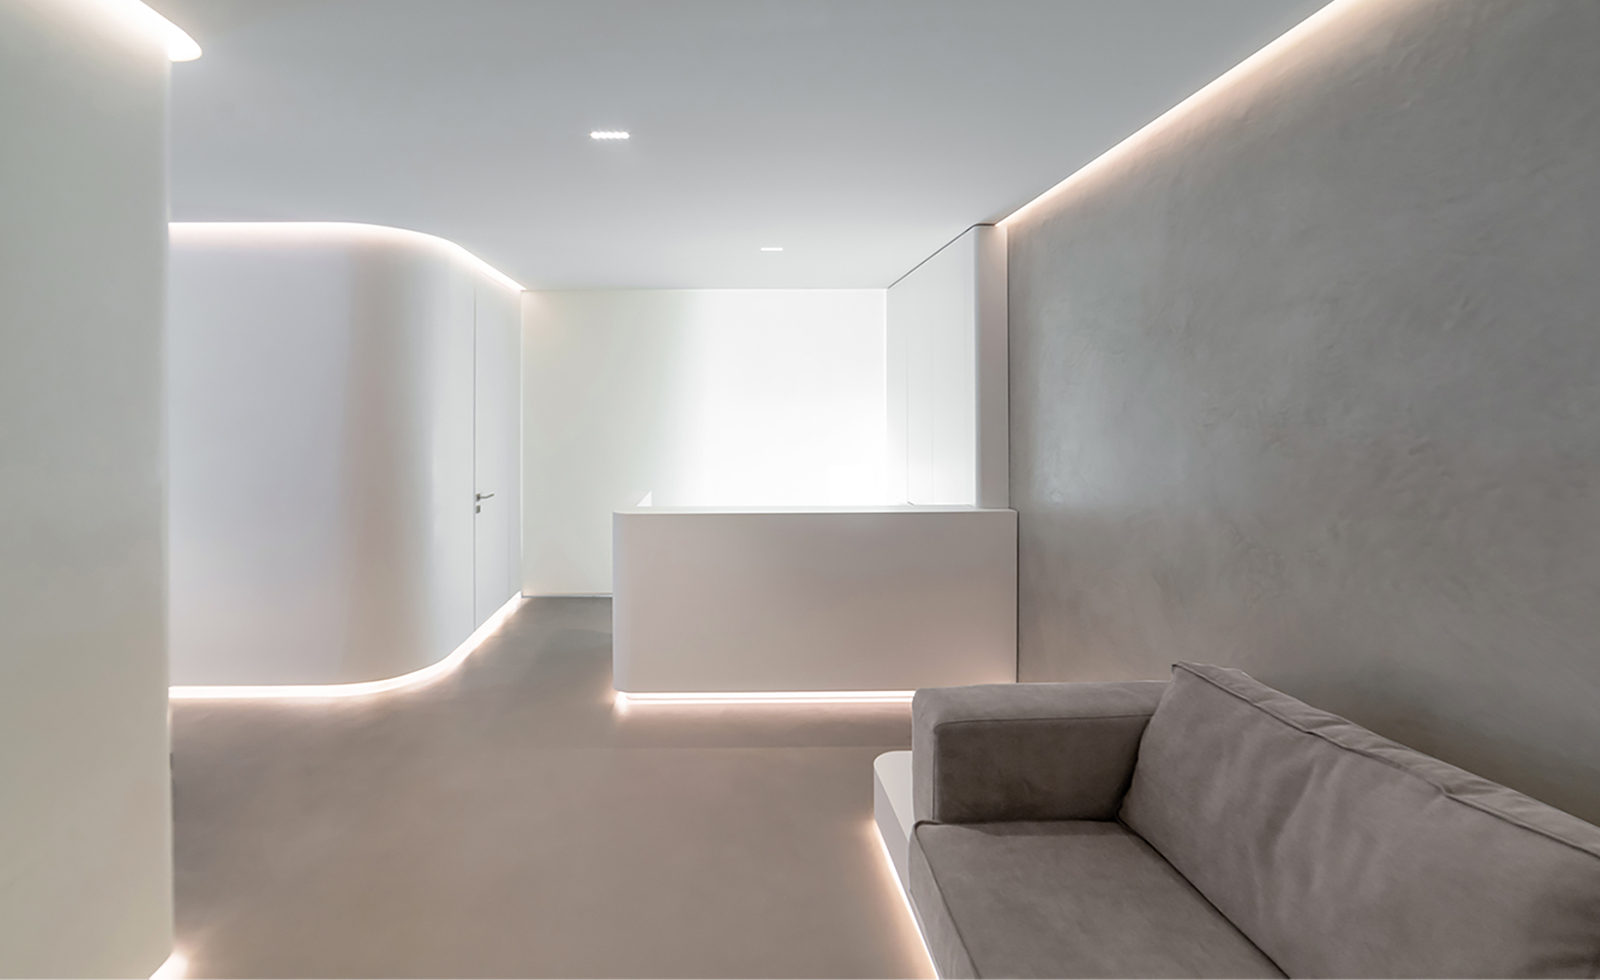 Renovation of a cardiology practice in Larissa, Greece by KORDAS ...